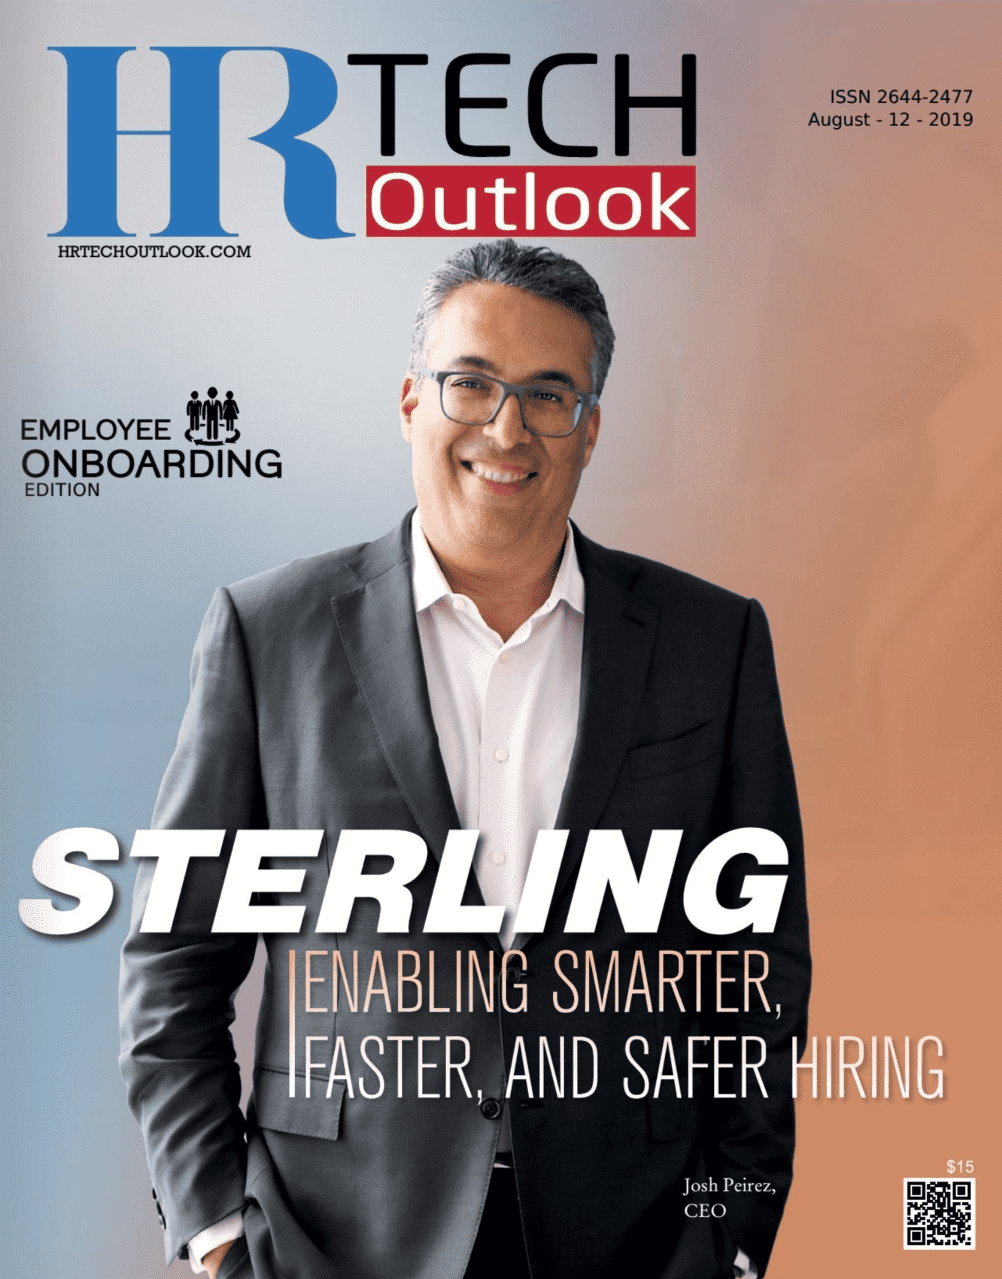 Peirez on HR TECH Outlook cover page